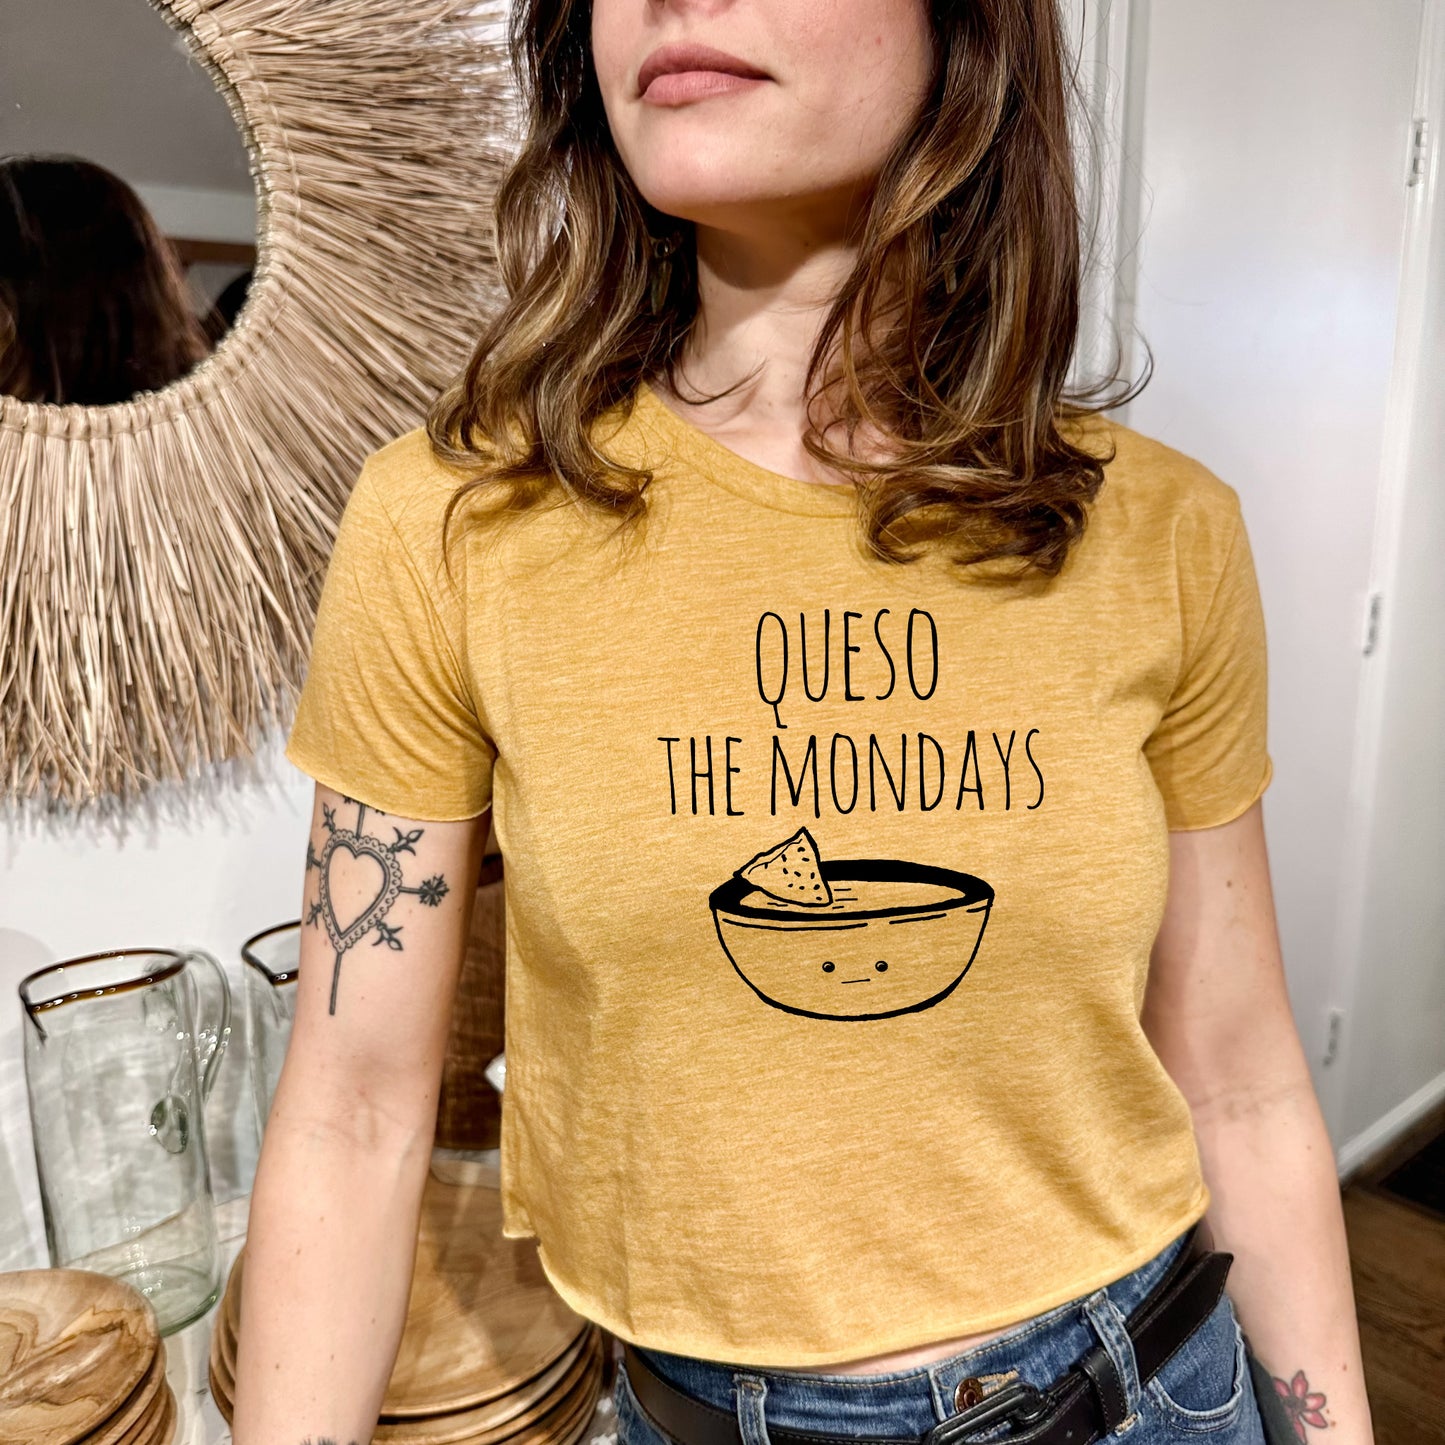 Queso The Mondays (Tacos) - Women's Crop Tee - Heather Gray or Gold